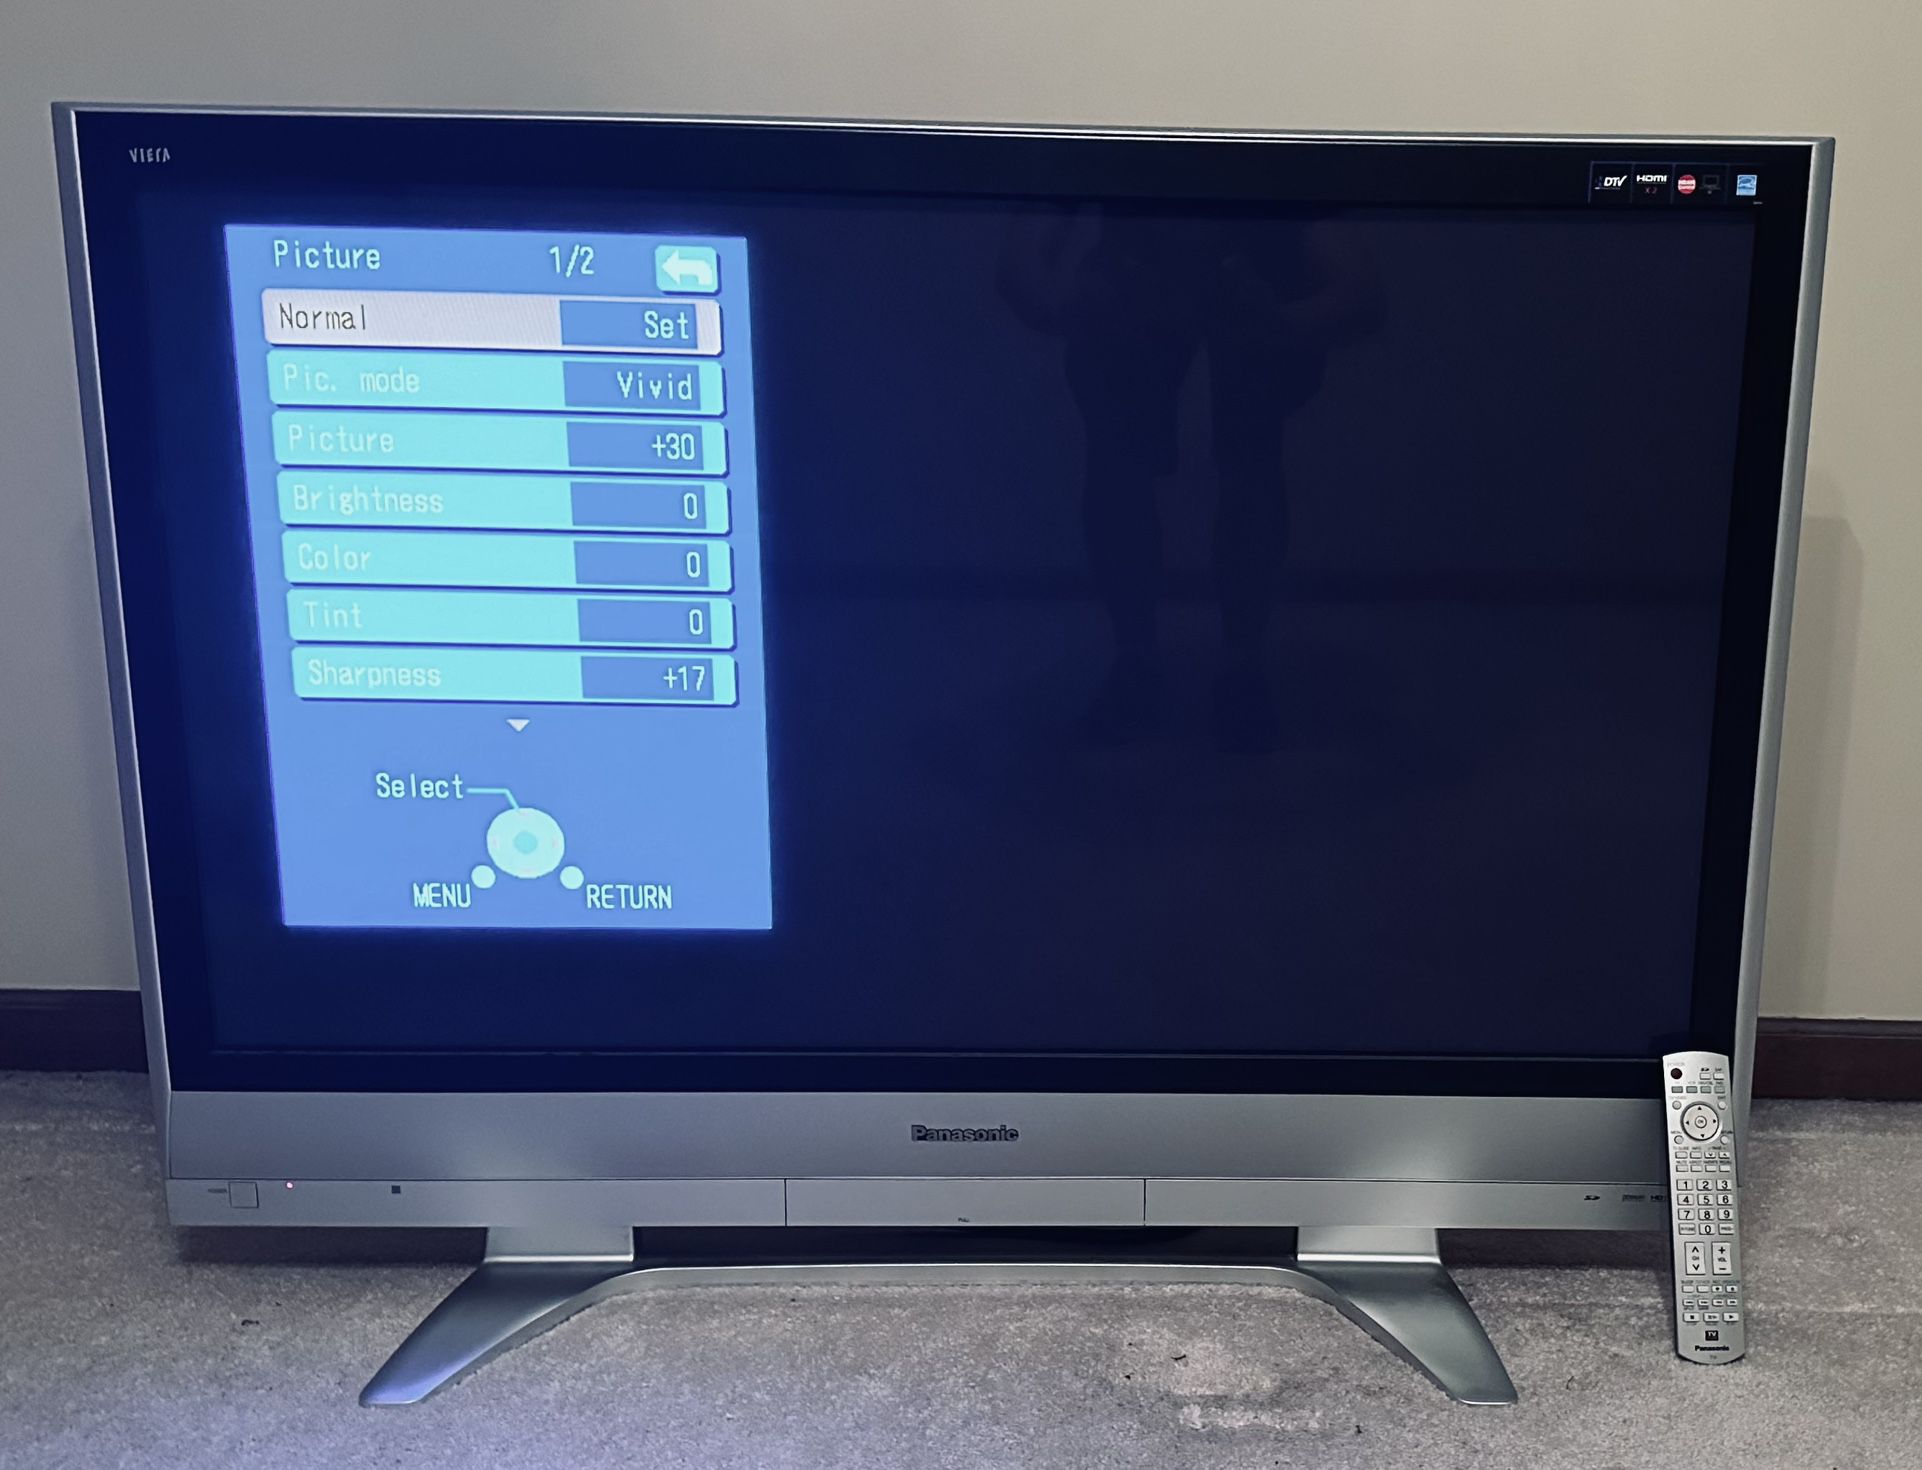 50 Inch Panasonic TV with 2 HDMI inputs and  Remote 